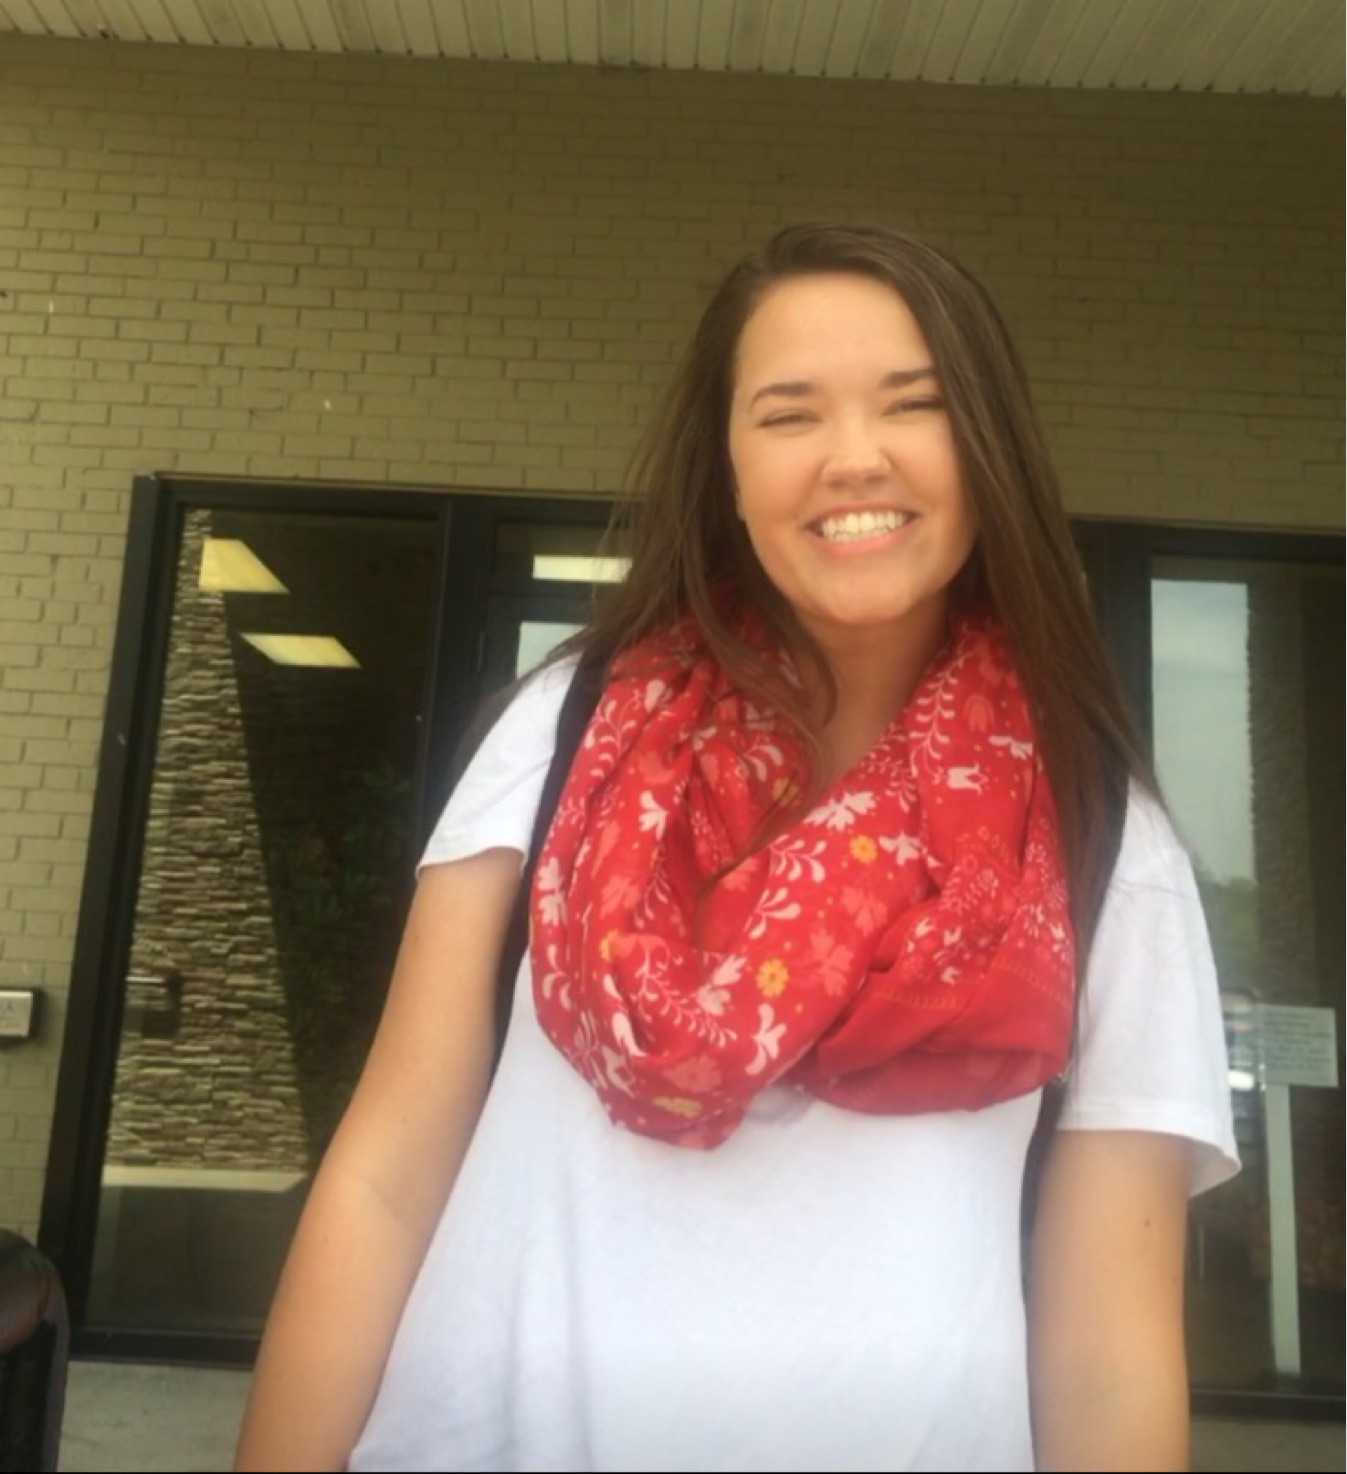 Madison smiles on last day of community college